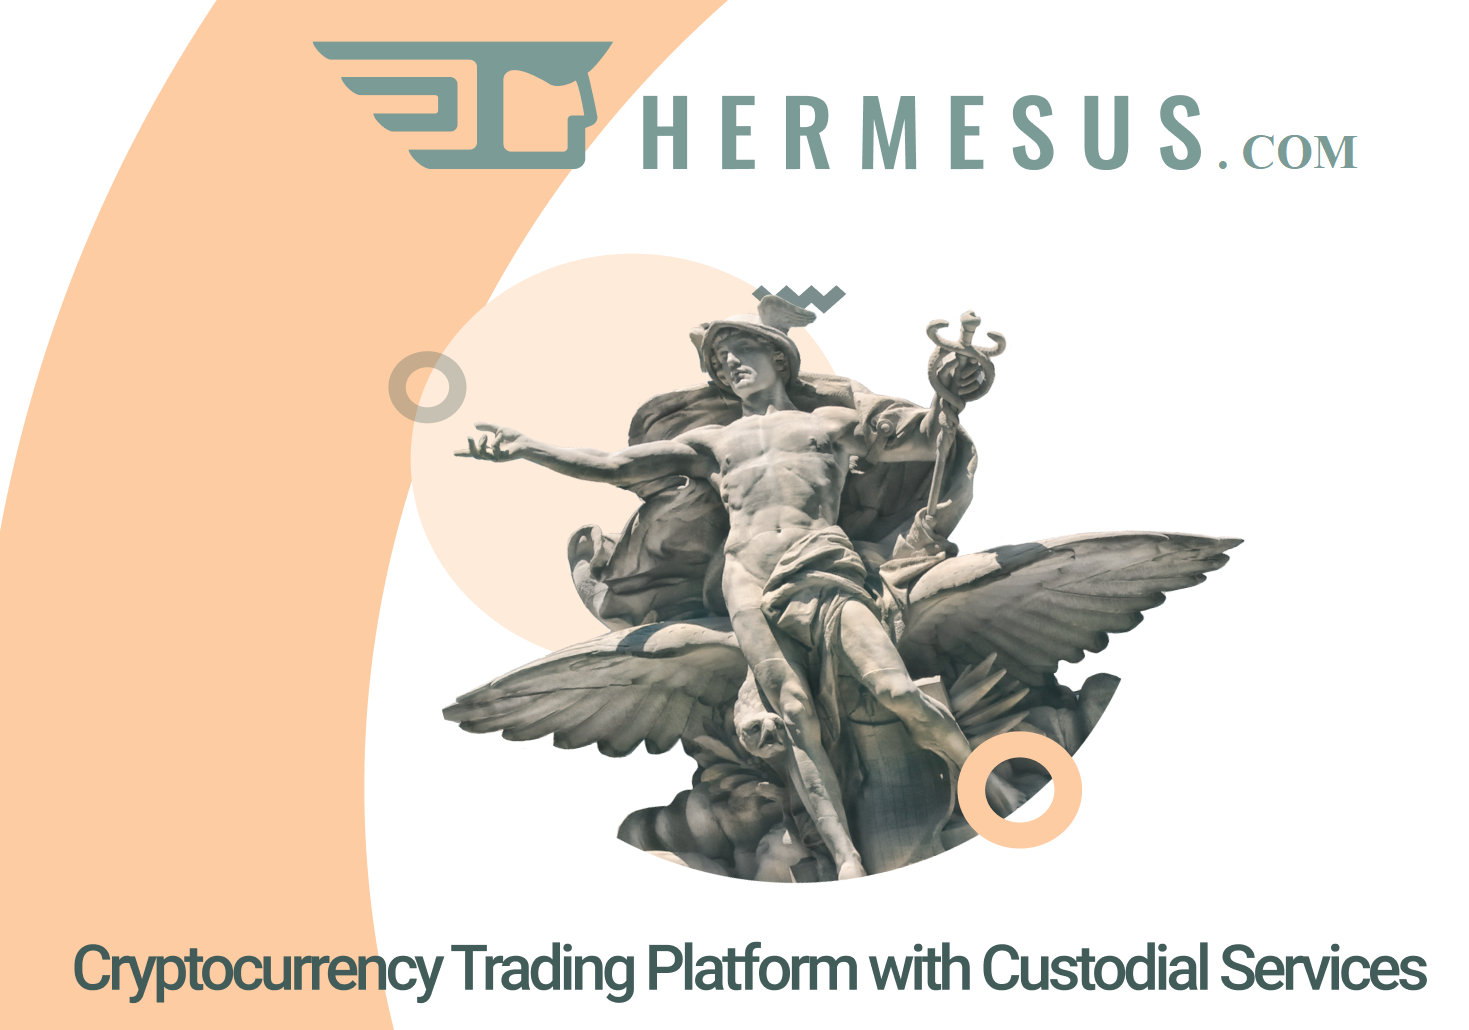 Hermesus.com, Friday, July 30, 2021, Press release picture